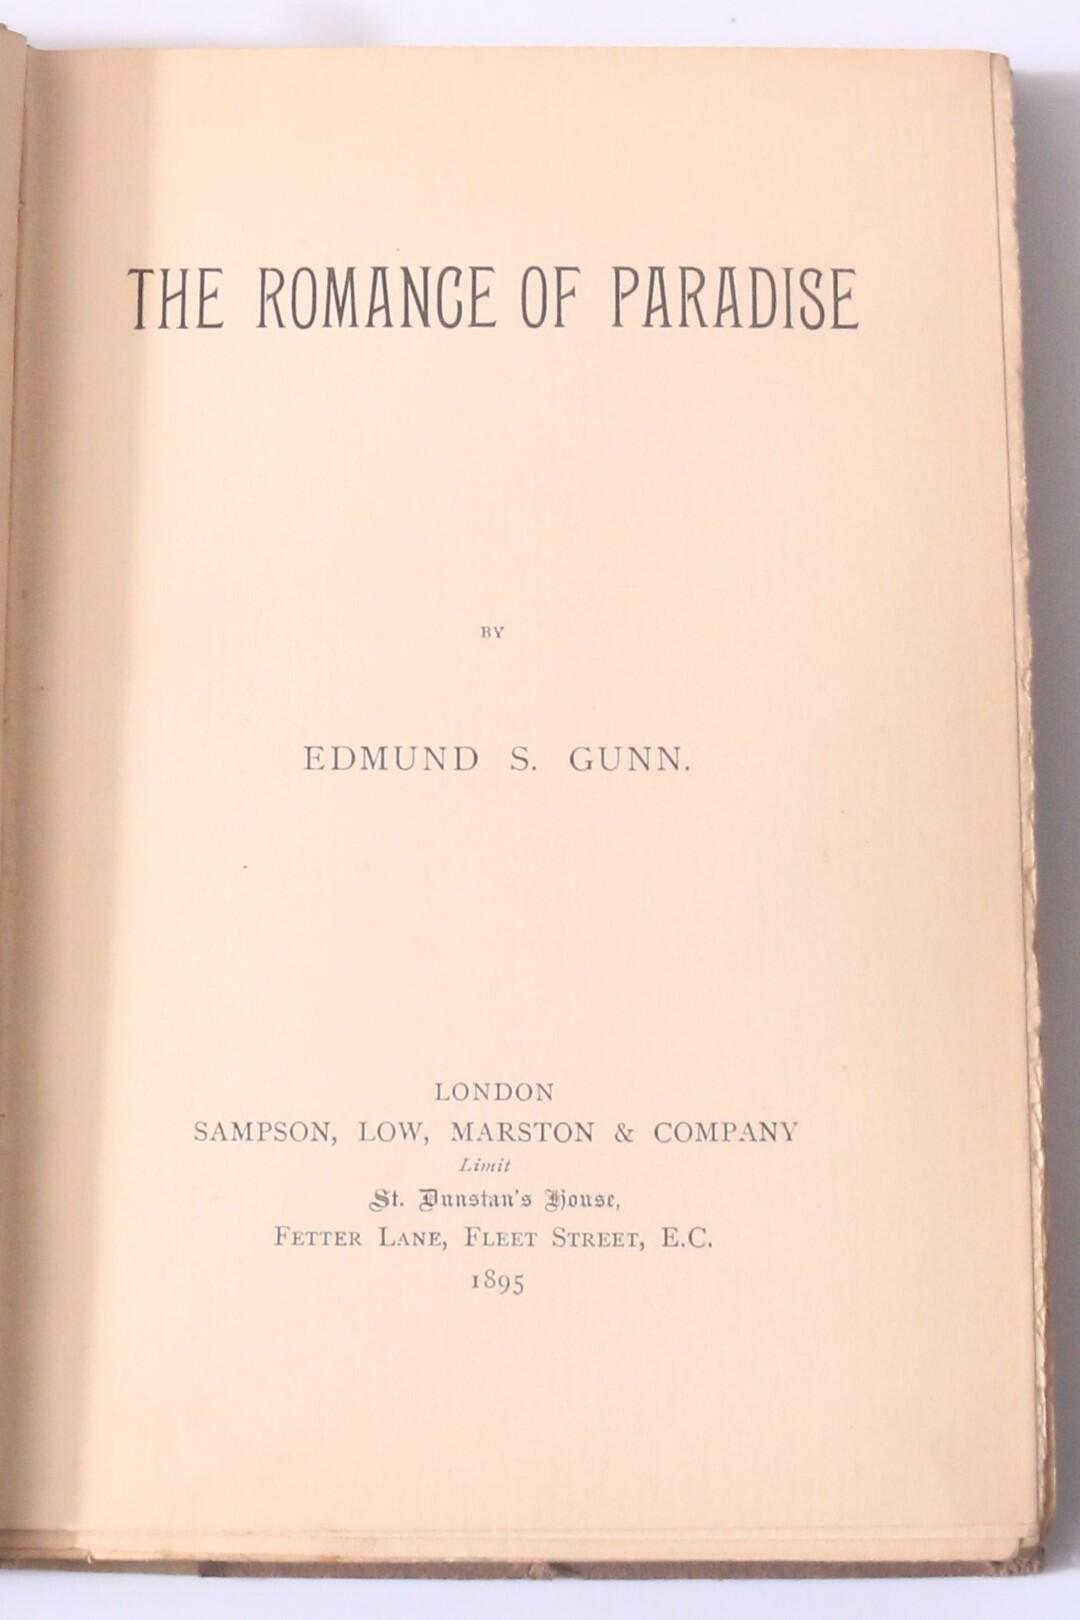 Edmund S. Gunn - The Romance of Paradise - Sampson, Low, Marston & Co., 1895, Signed First Edition.